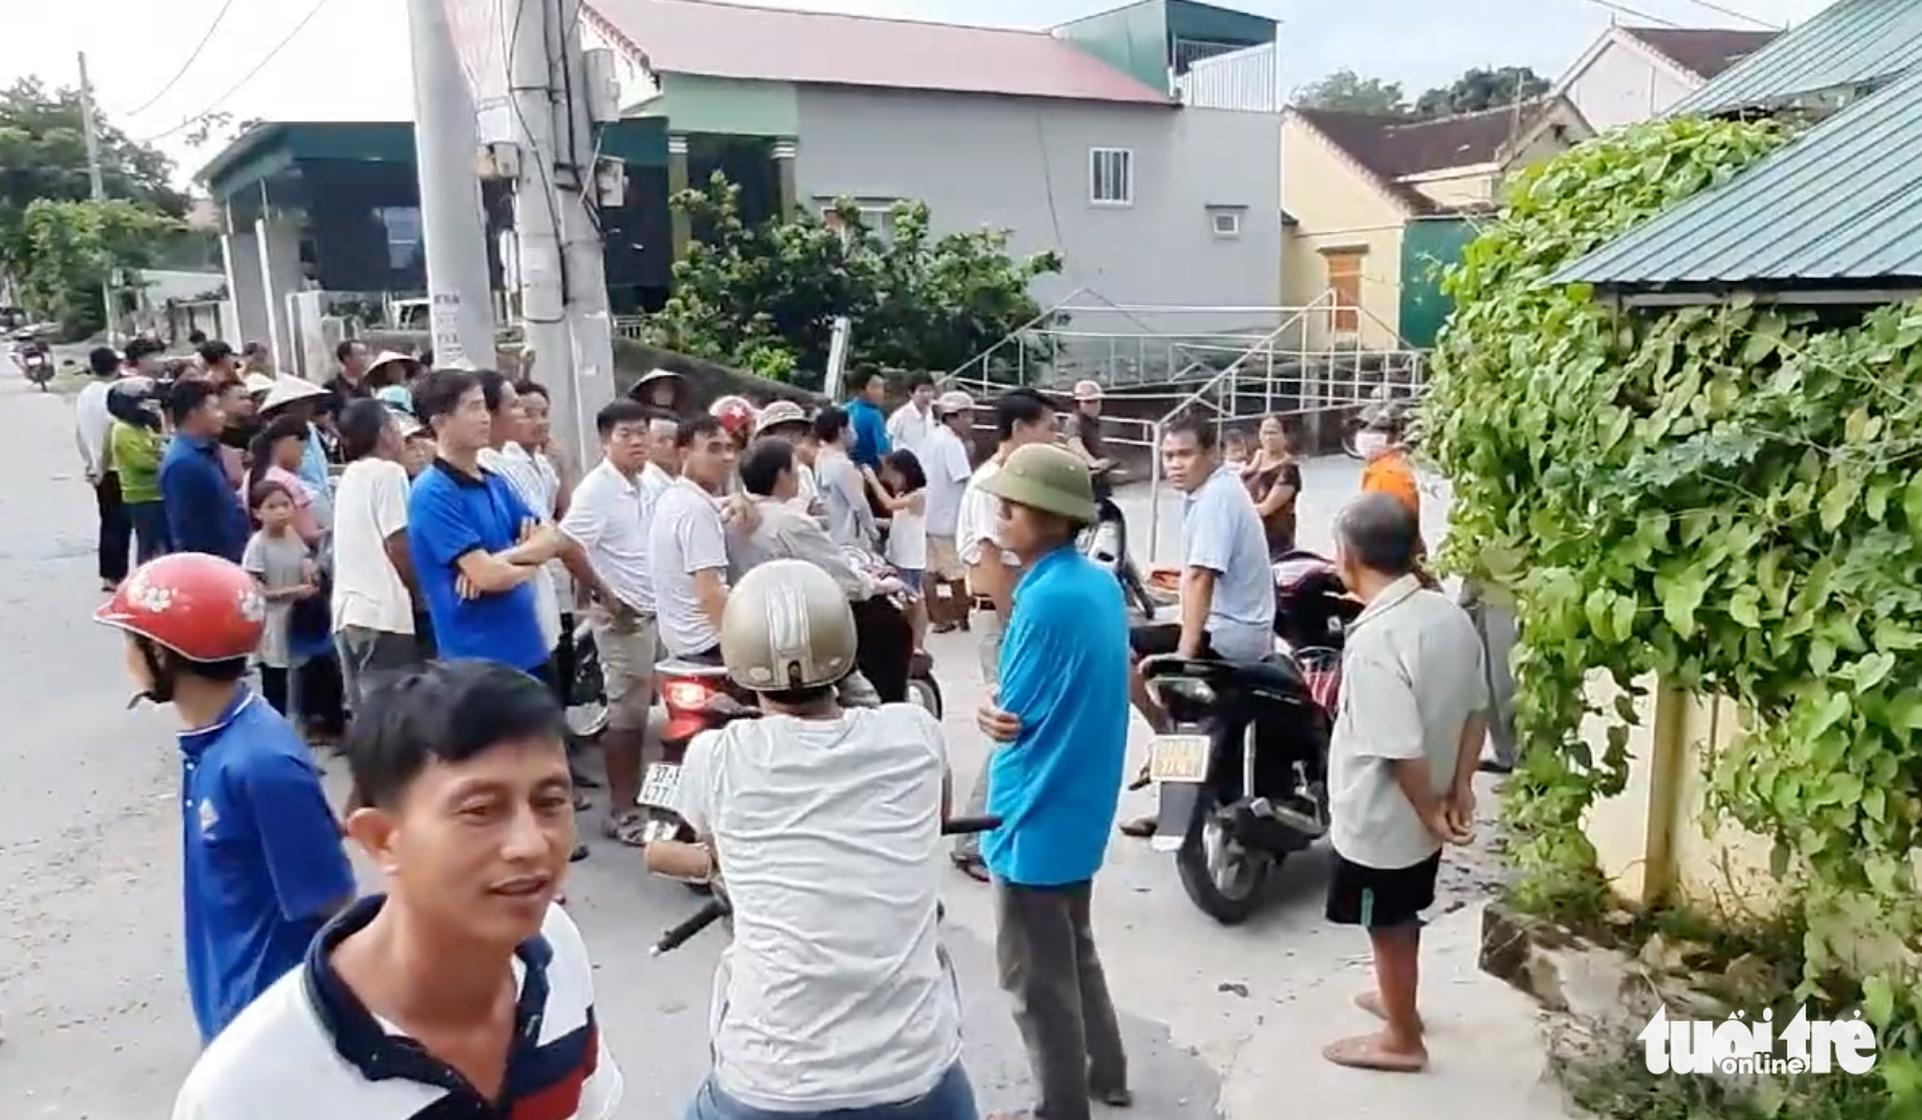 In Vietnam, former cop agrees to repay $30k debt after creditor makes scene outside home